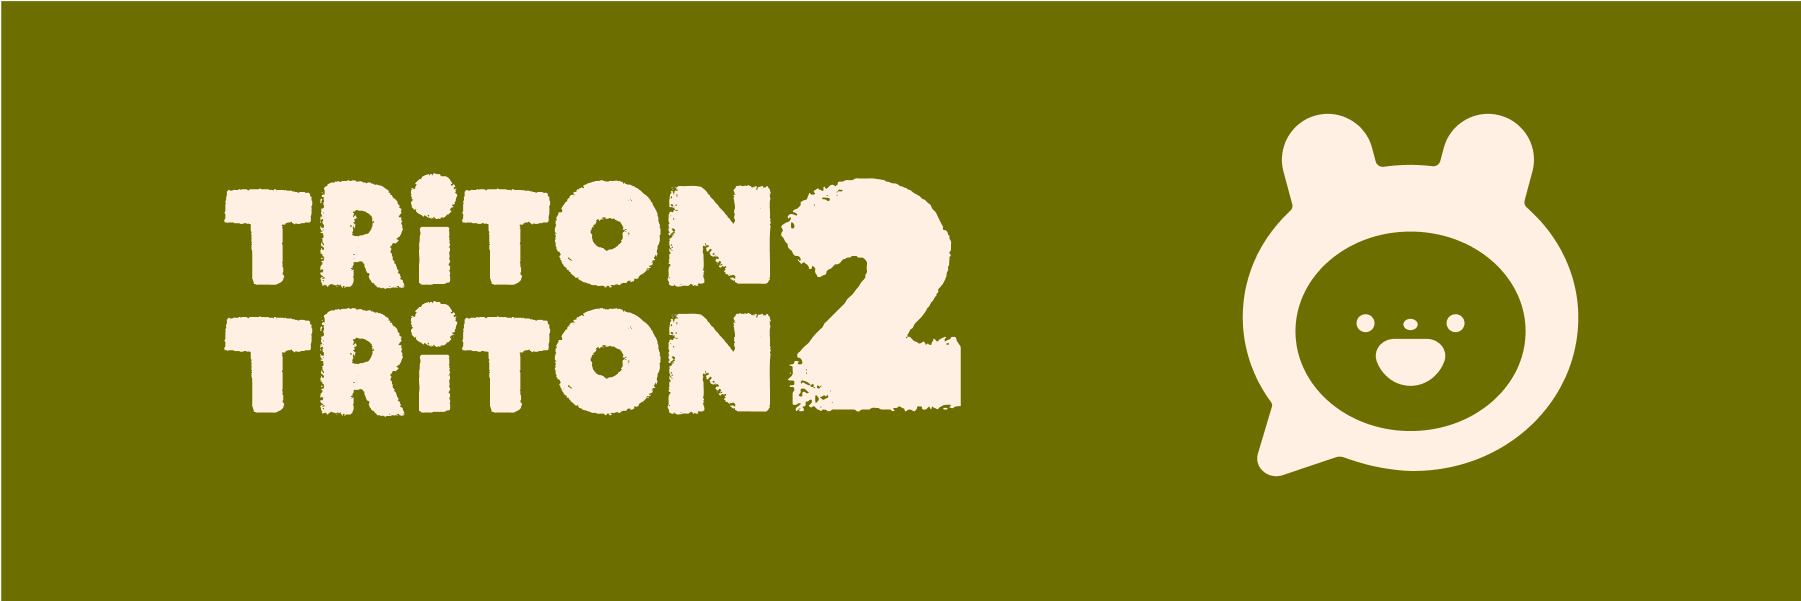 T2T-Banner-Green.png